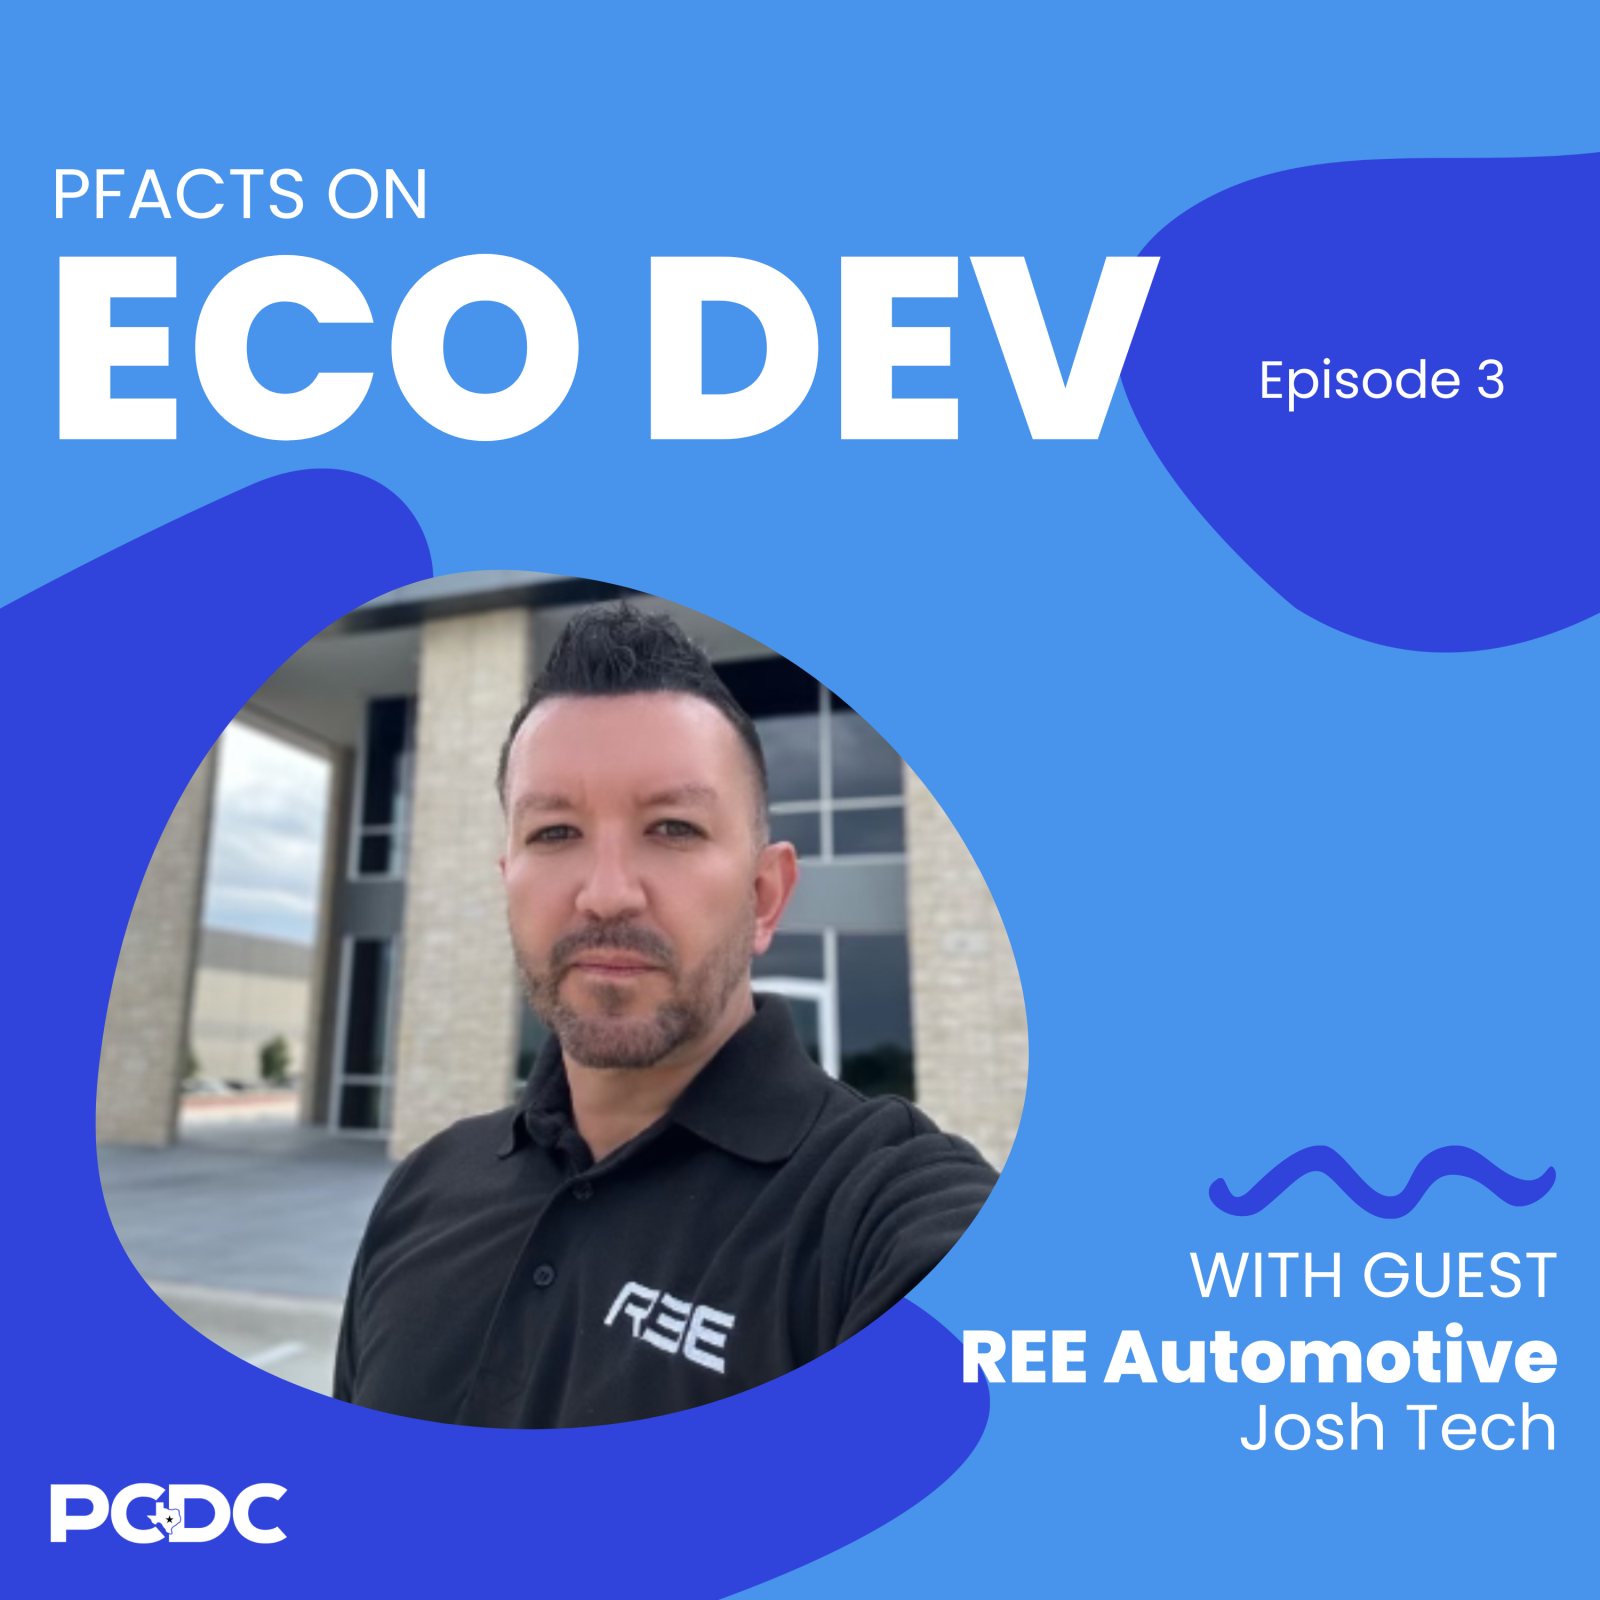 PFACTS ON ECO DEV PODCAST EPISODE 3 Main Photo